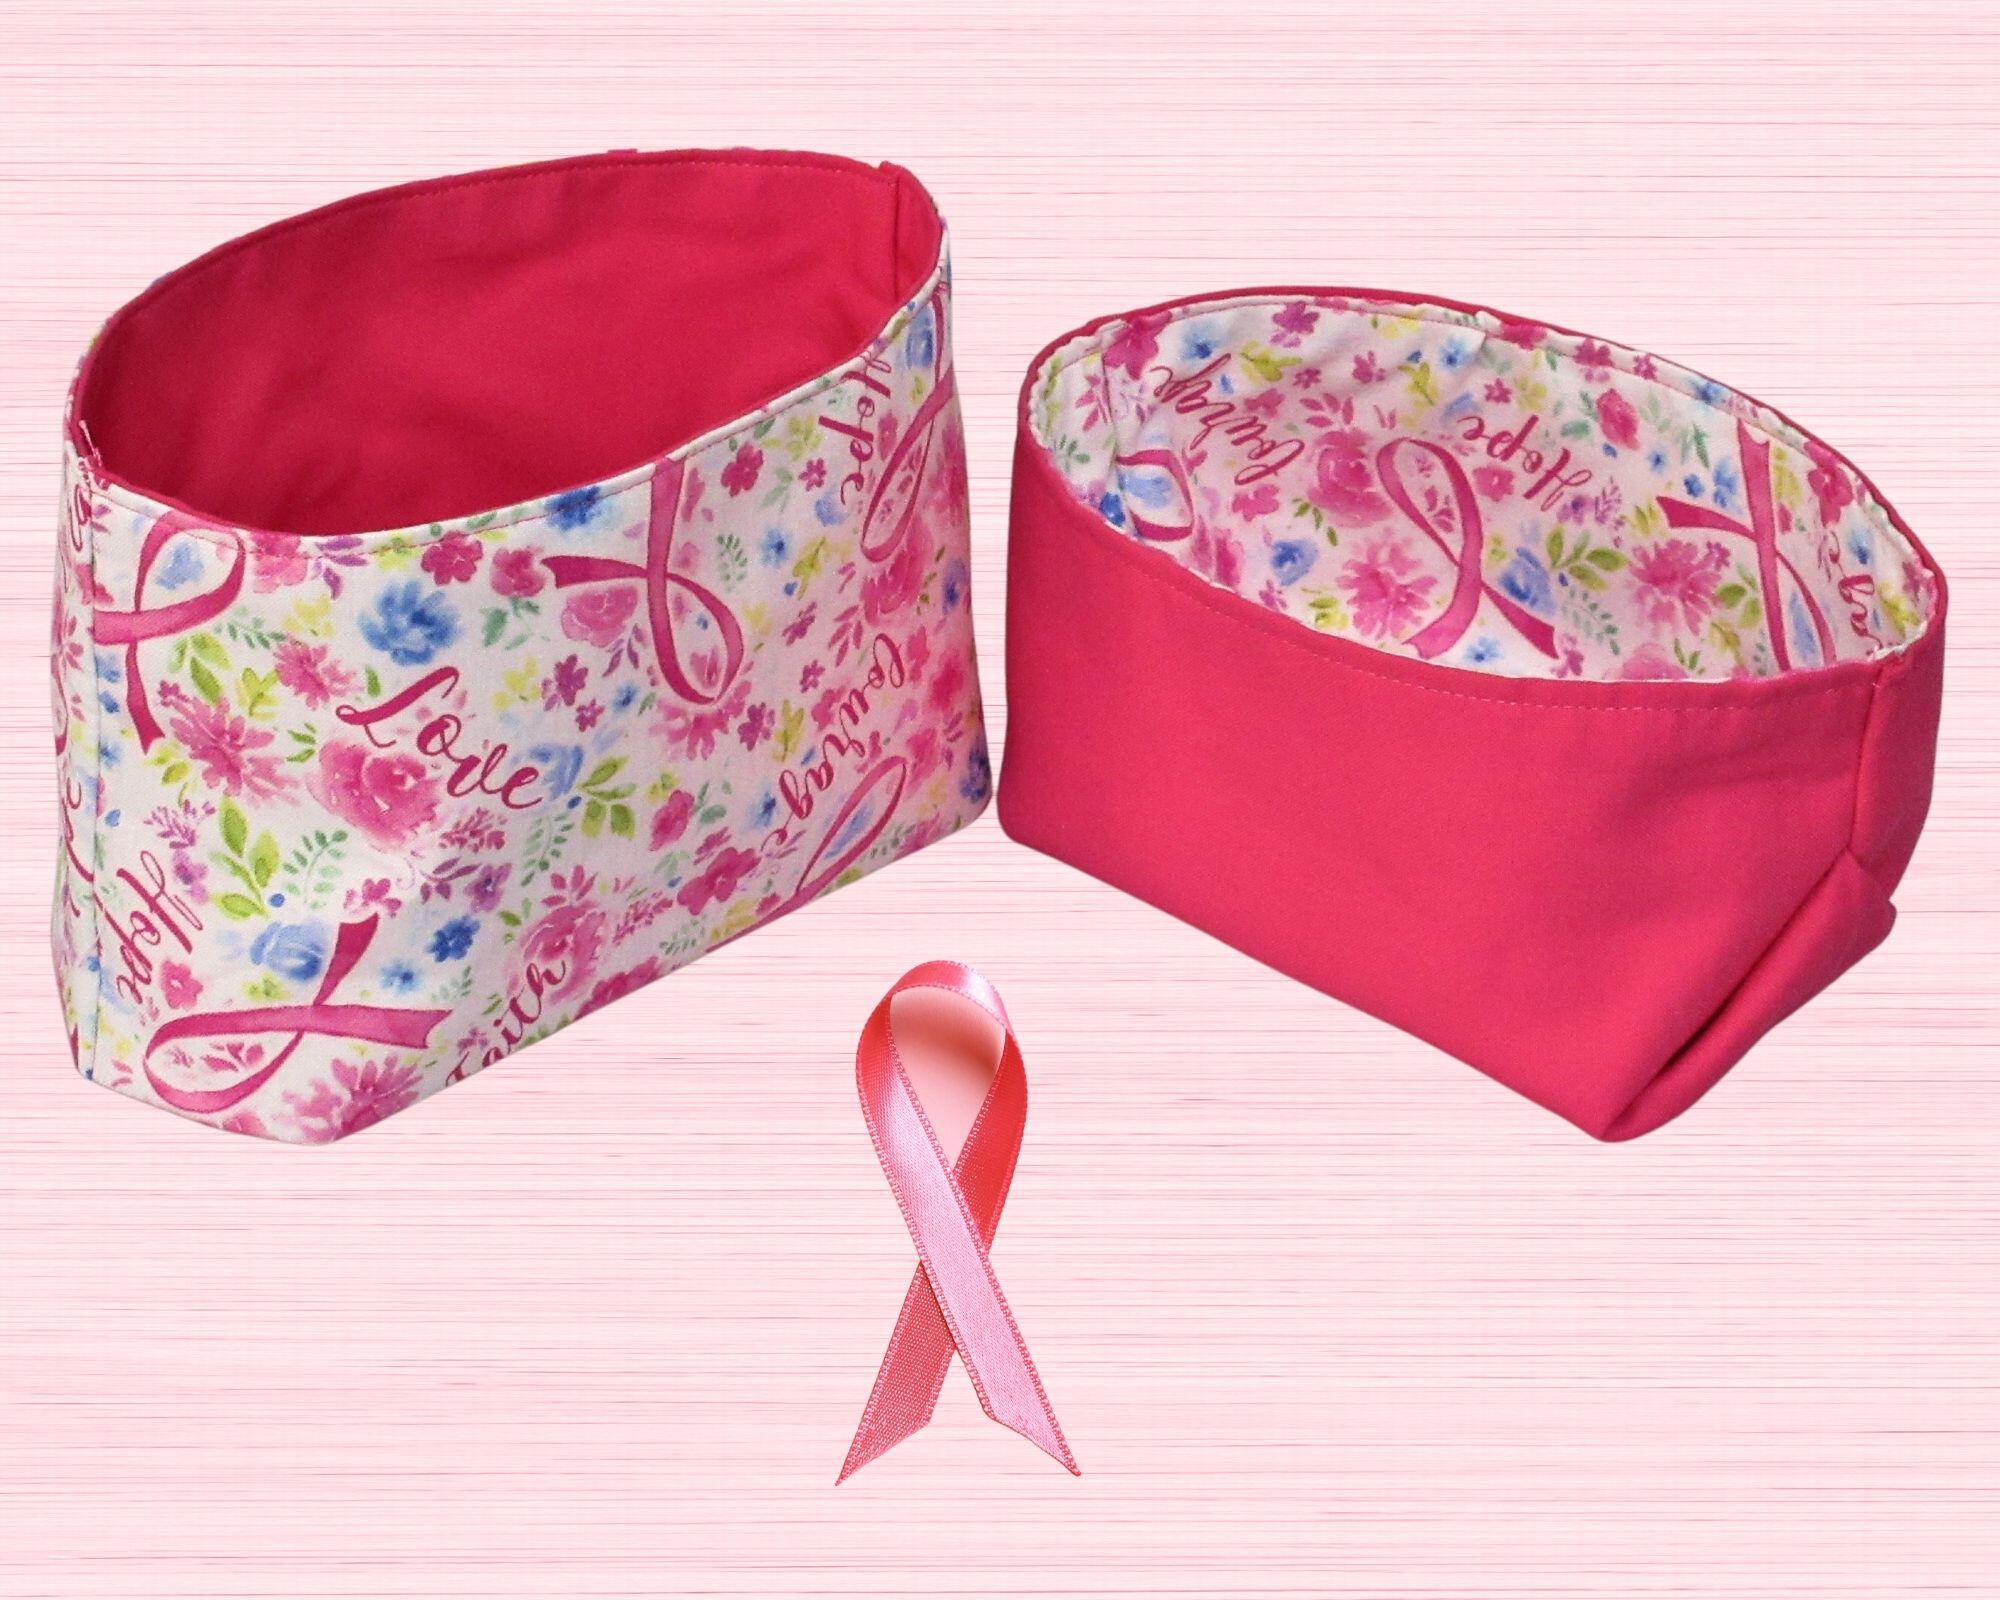 Pink ribbon caring gift set - 2 fabric baskets,  in pink ribbon, flowers, and words of hope pattern with a hot pink reverse.  In addition all products are reversible and support Breast cancer research.